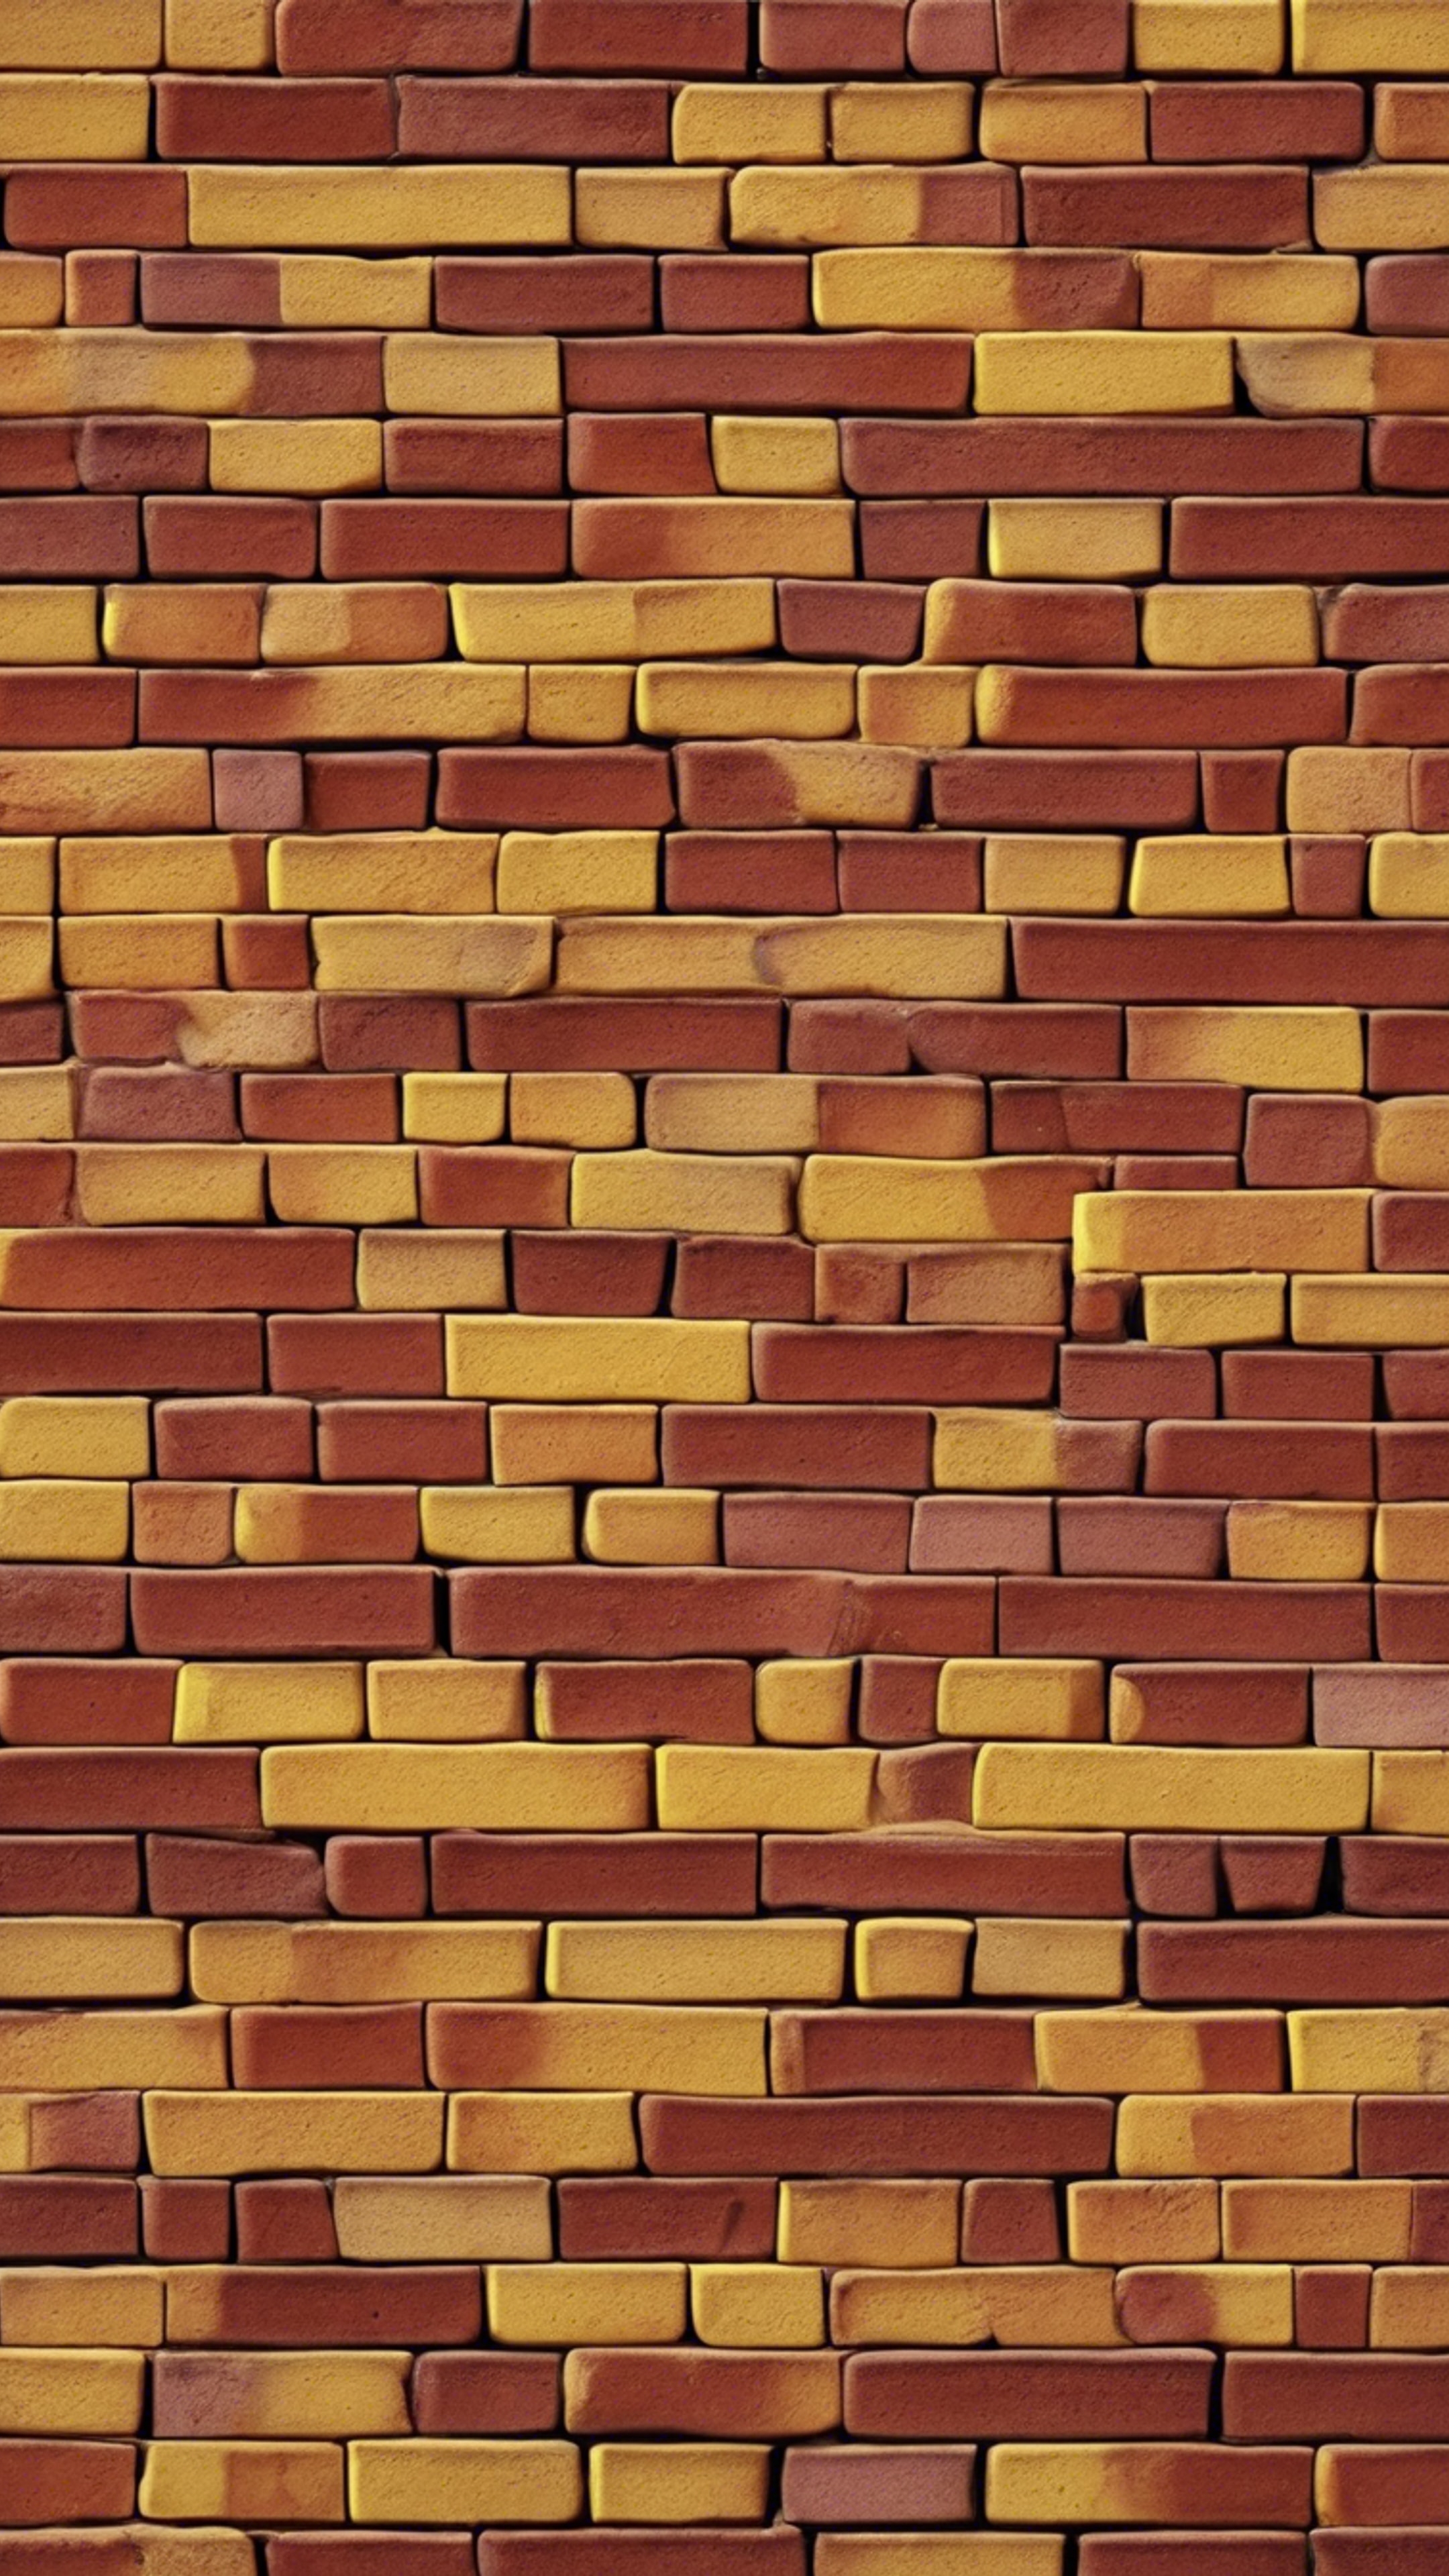 A tight close-up of a seamless, repeating pattern of red and yellow bricks. 벽지[1ac961dc3db44015ab94]